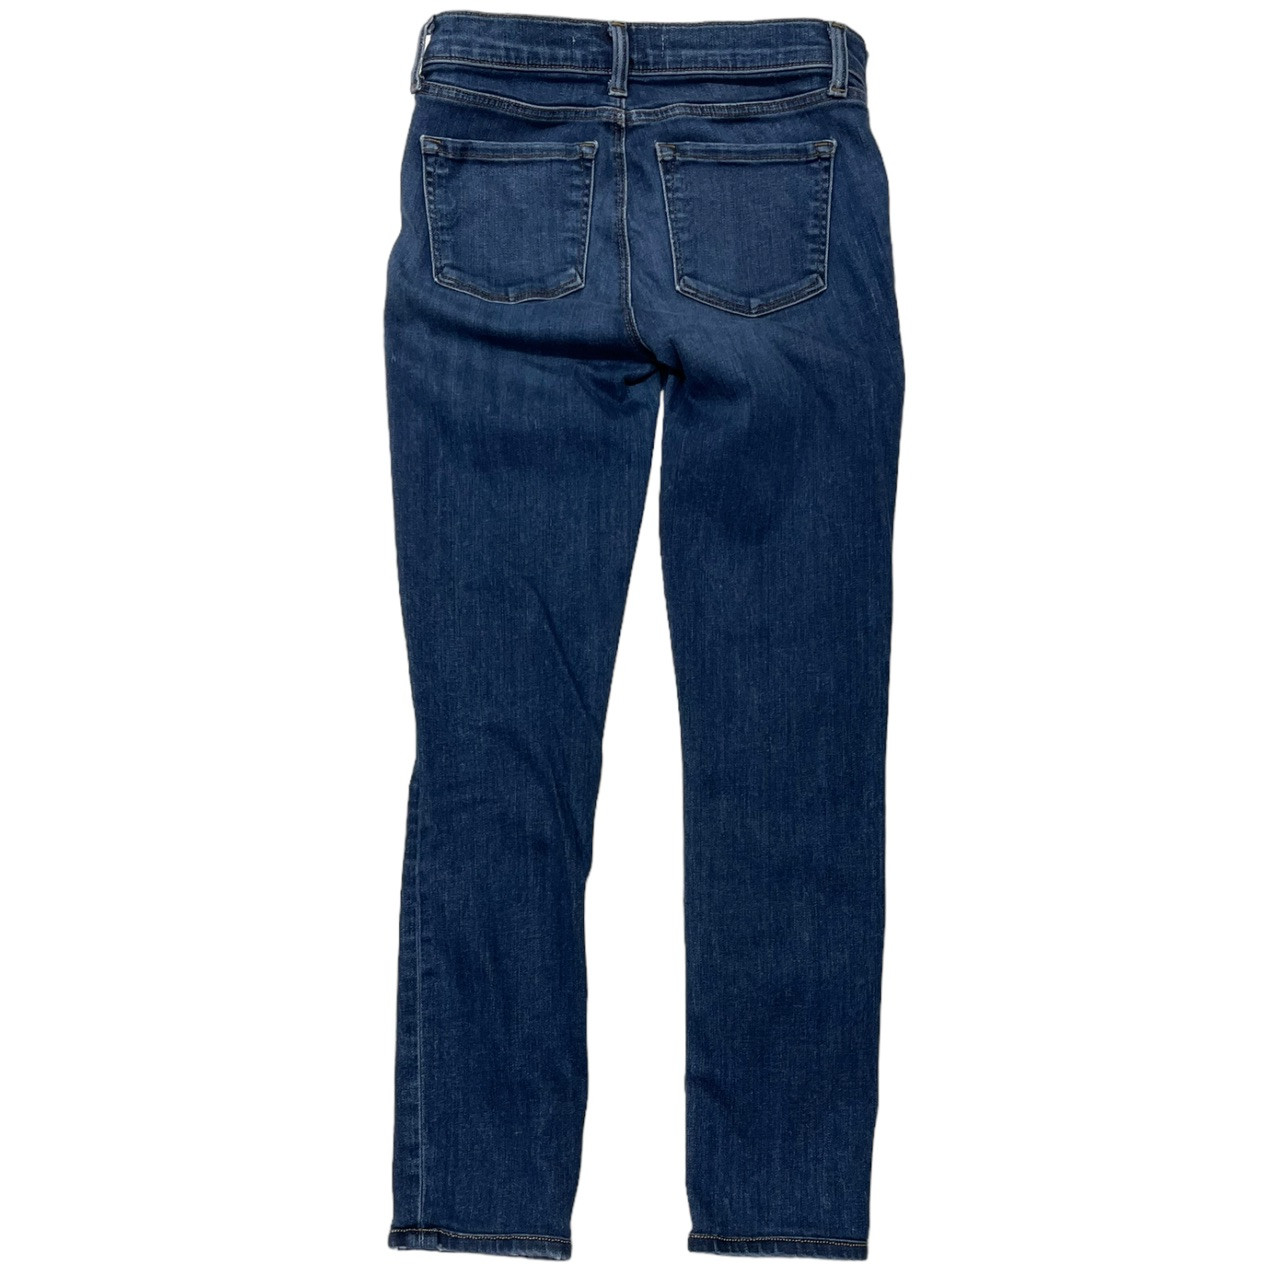 Shop J Brand Maternity Jeans up to 75% Off